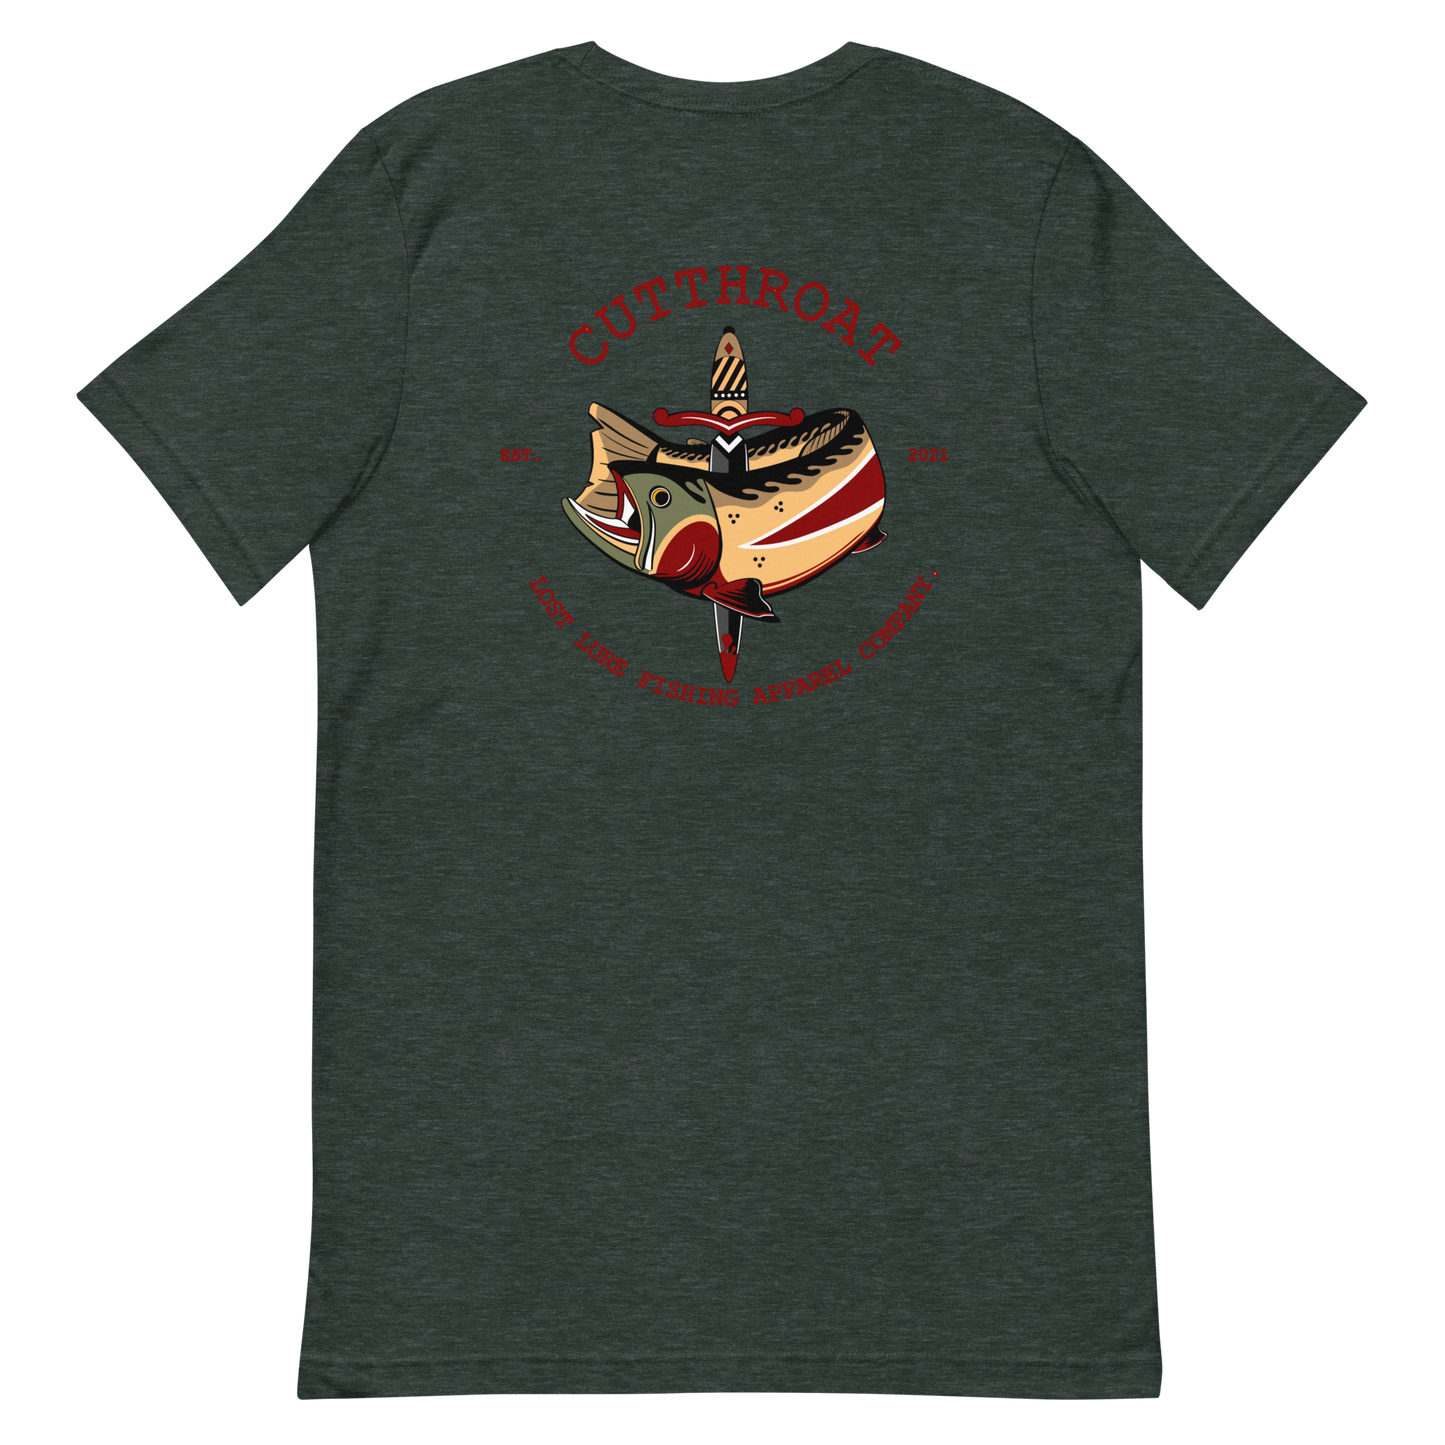 Cutthroat Trout fishing shirt. It’s an American traditional style design with a cutthroat trout and a dagger. The shirt reads Cutthroat trout, est. 2021, lost lure fishing apparel company. The front of the shirt has the lost lure logo. Forrest green fishing shirt, back side